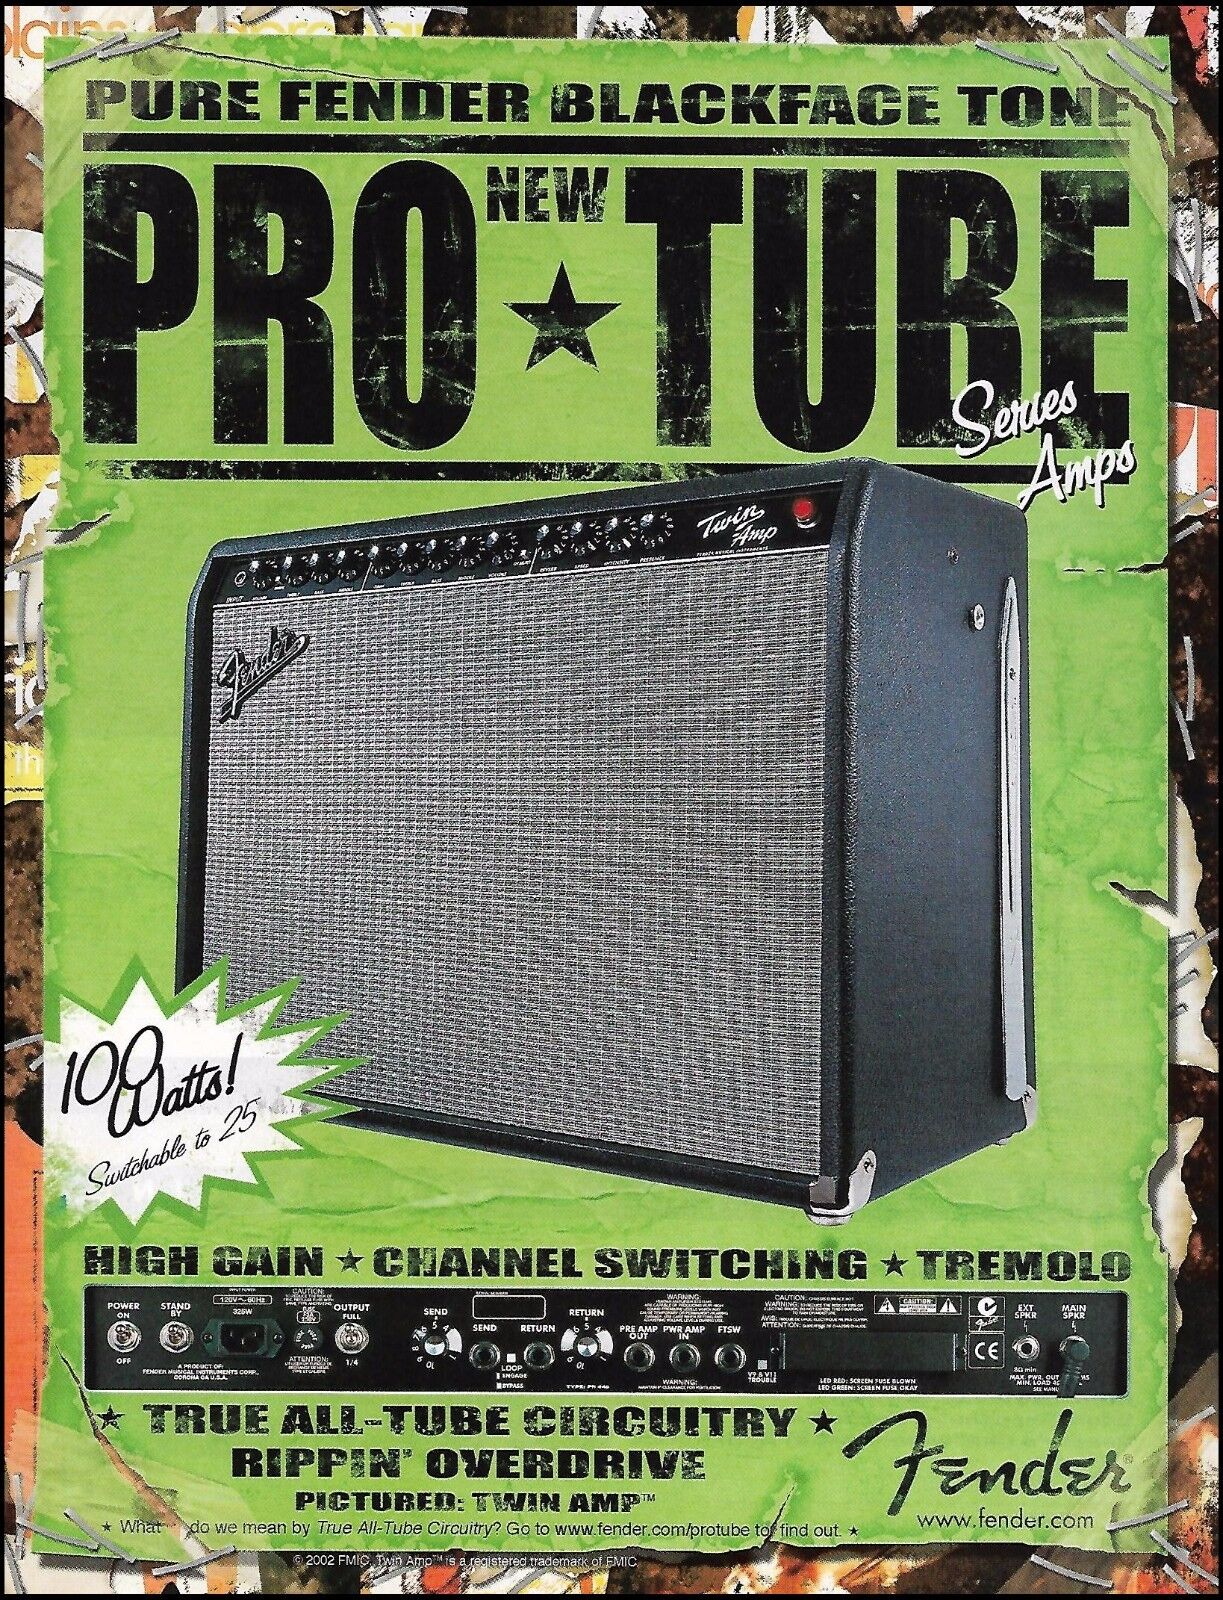 Fender Pro Tube Series Guitar Twin Amp 2002 ad 8 x 11 amplifier advertisement